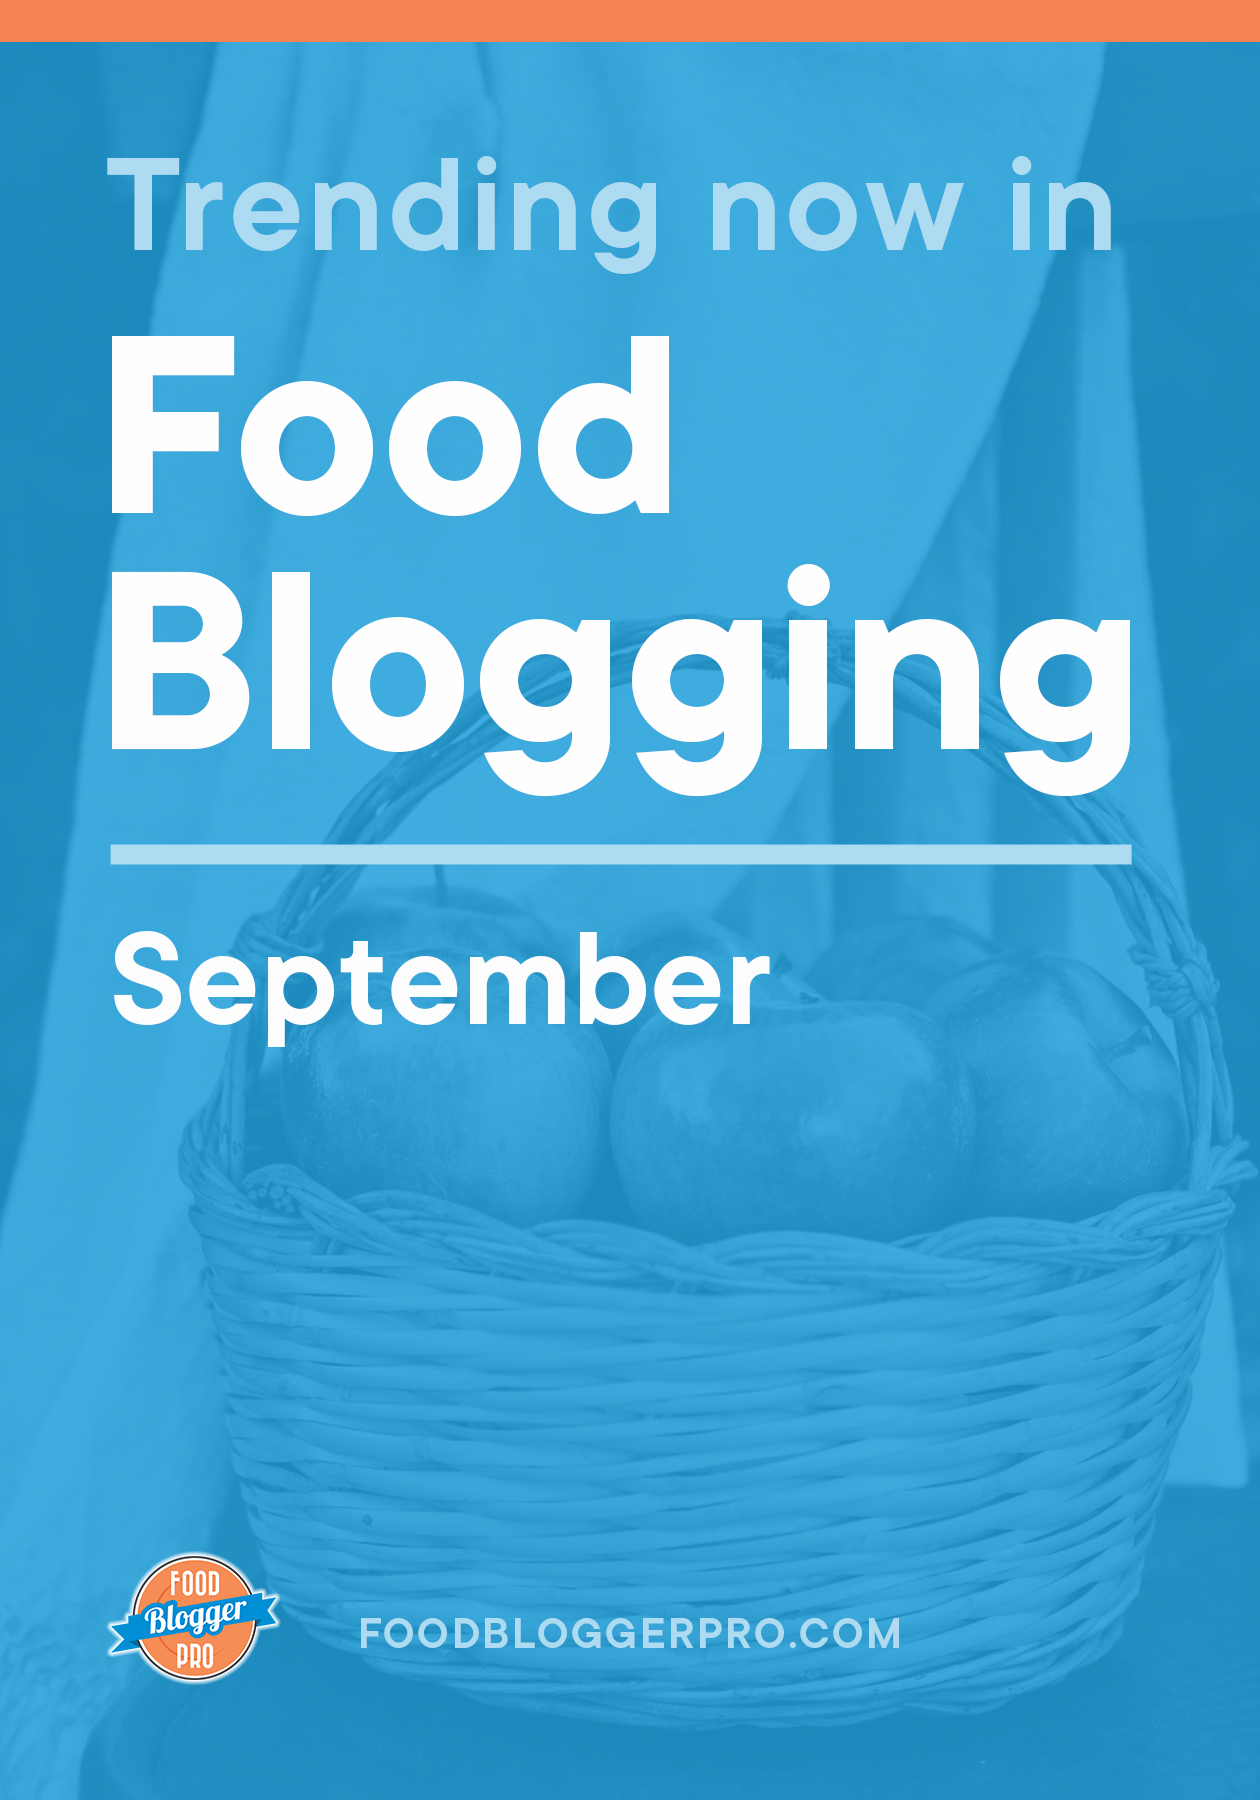 Blue graphic of apples that reads 'Trending Now in Food Blogger - September' with the Food Blogger Pro logo